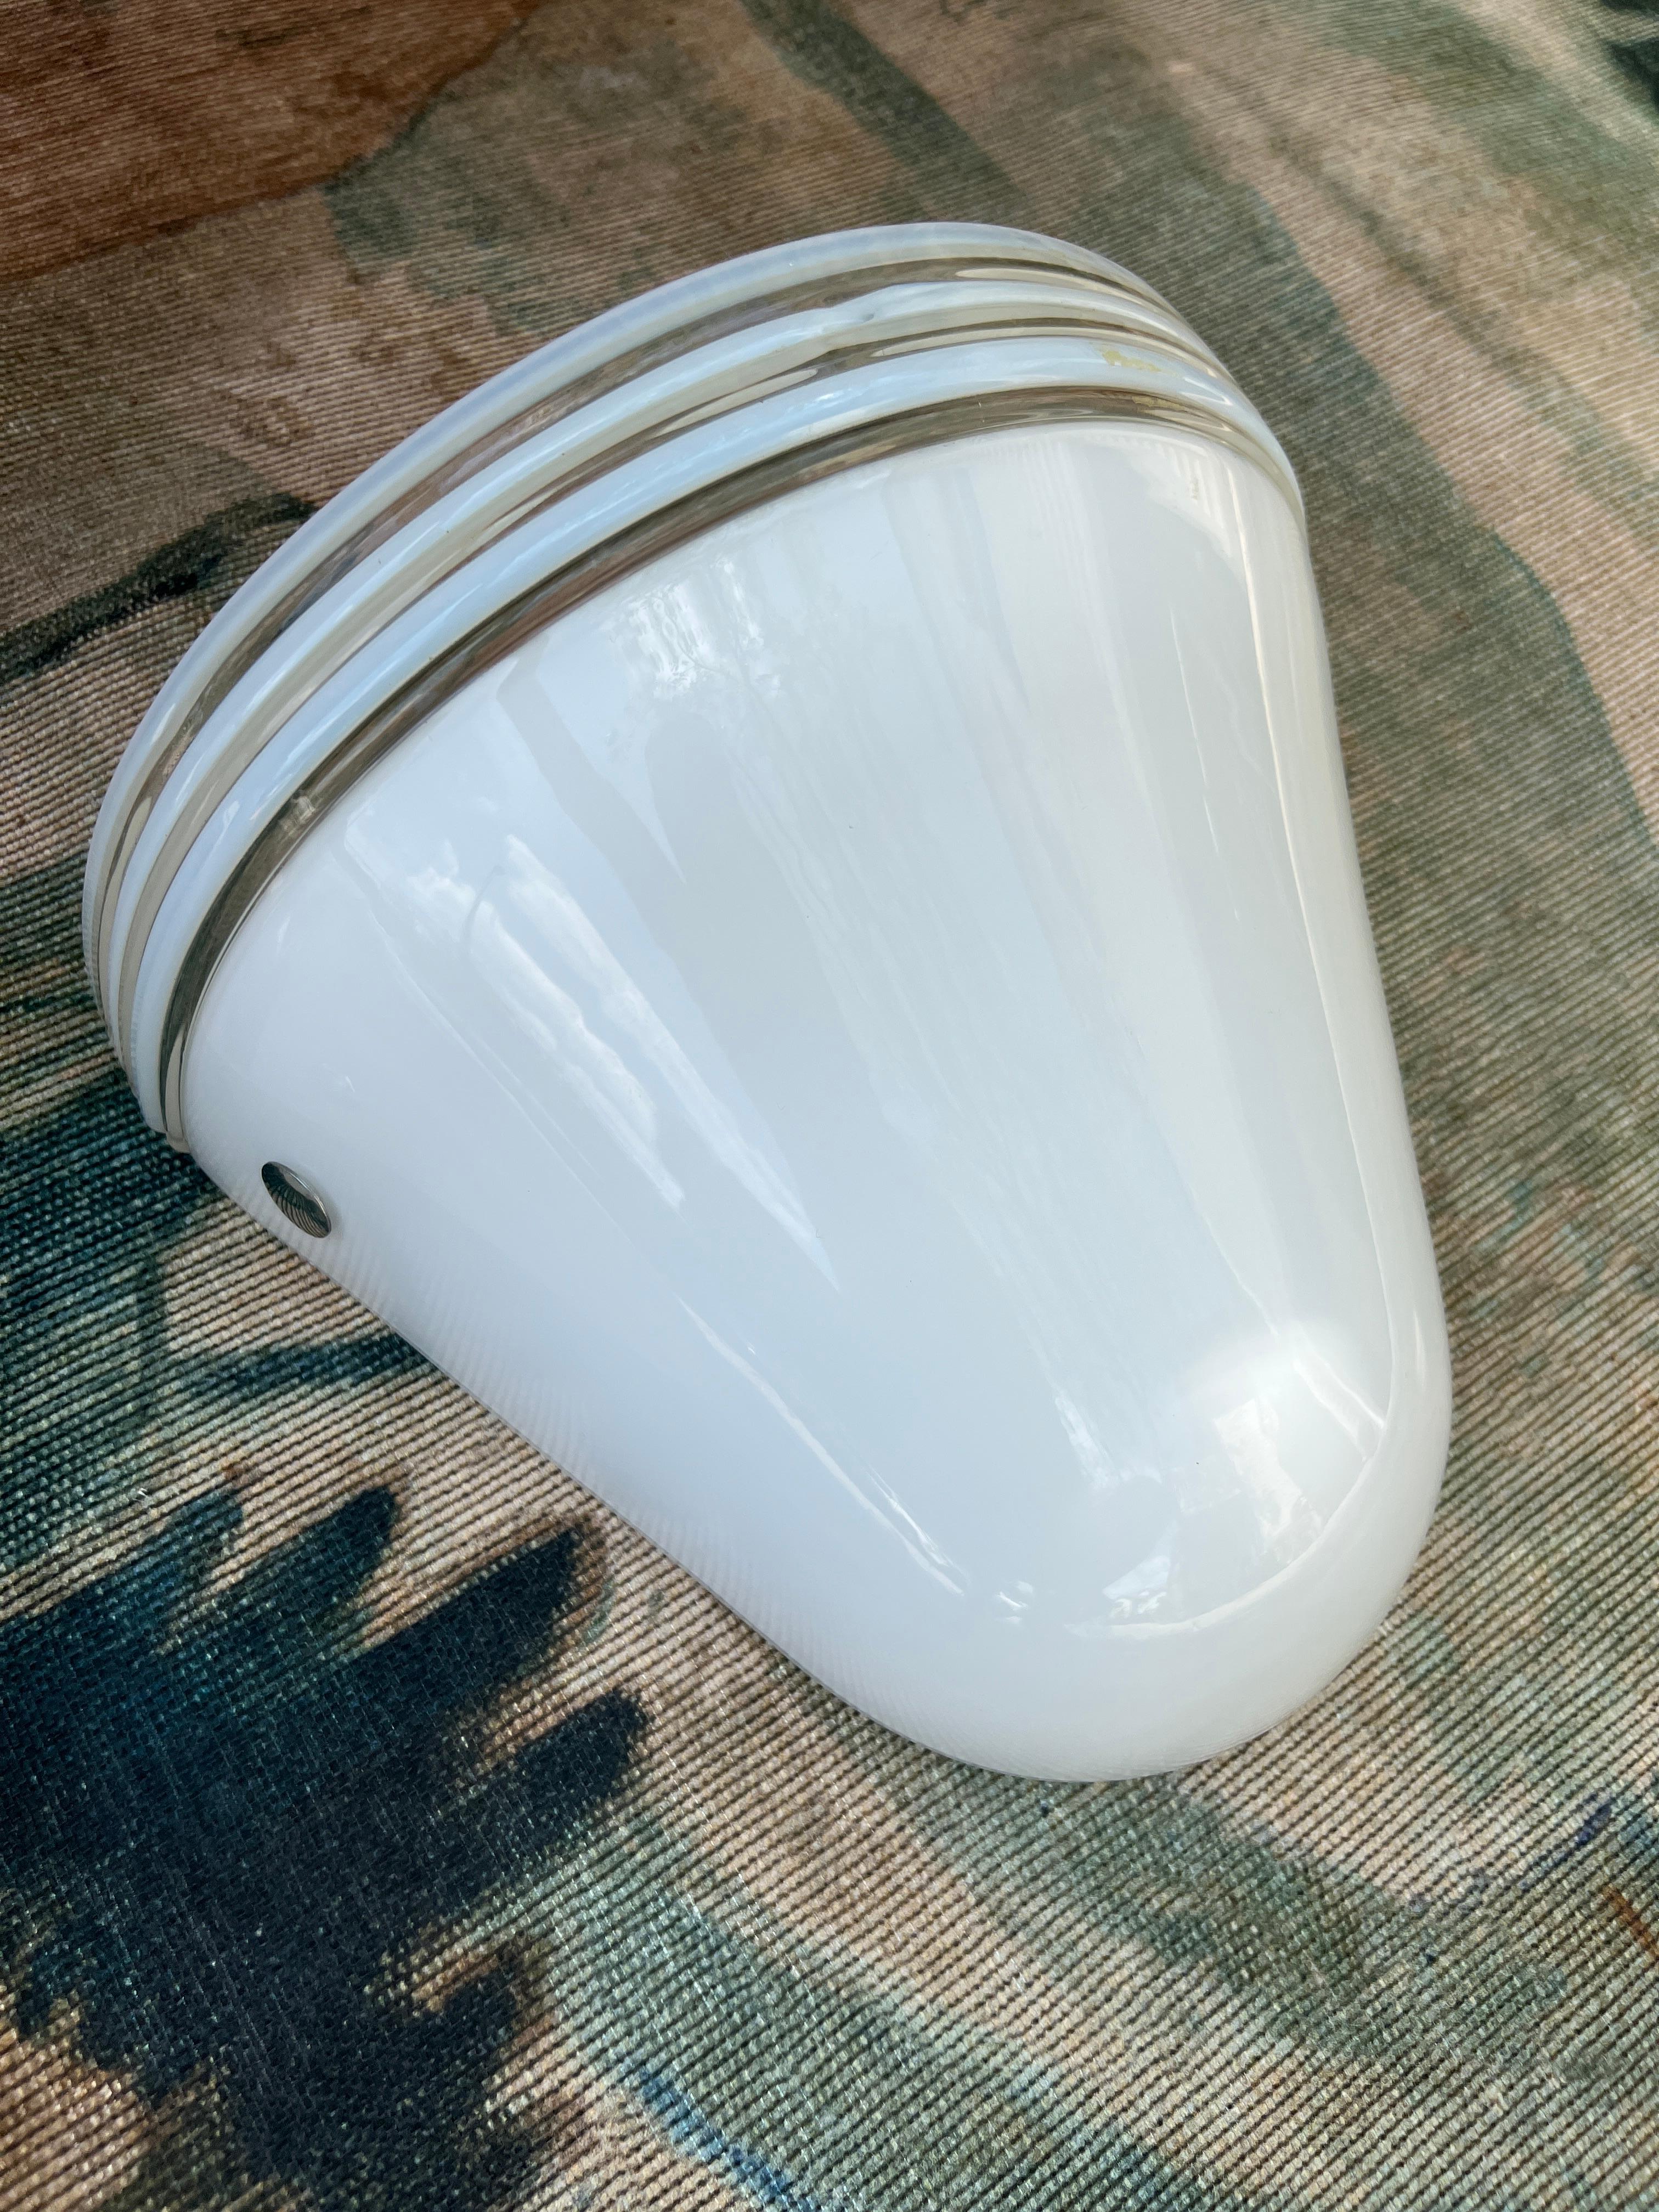 Hand-Crafted Mid-Century Modern Murano Glass Sconce in White, by Leucos, c. 1970s For Sale